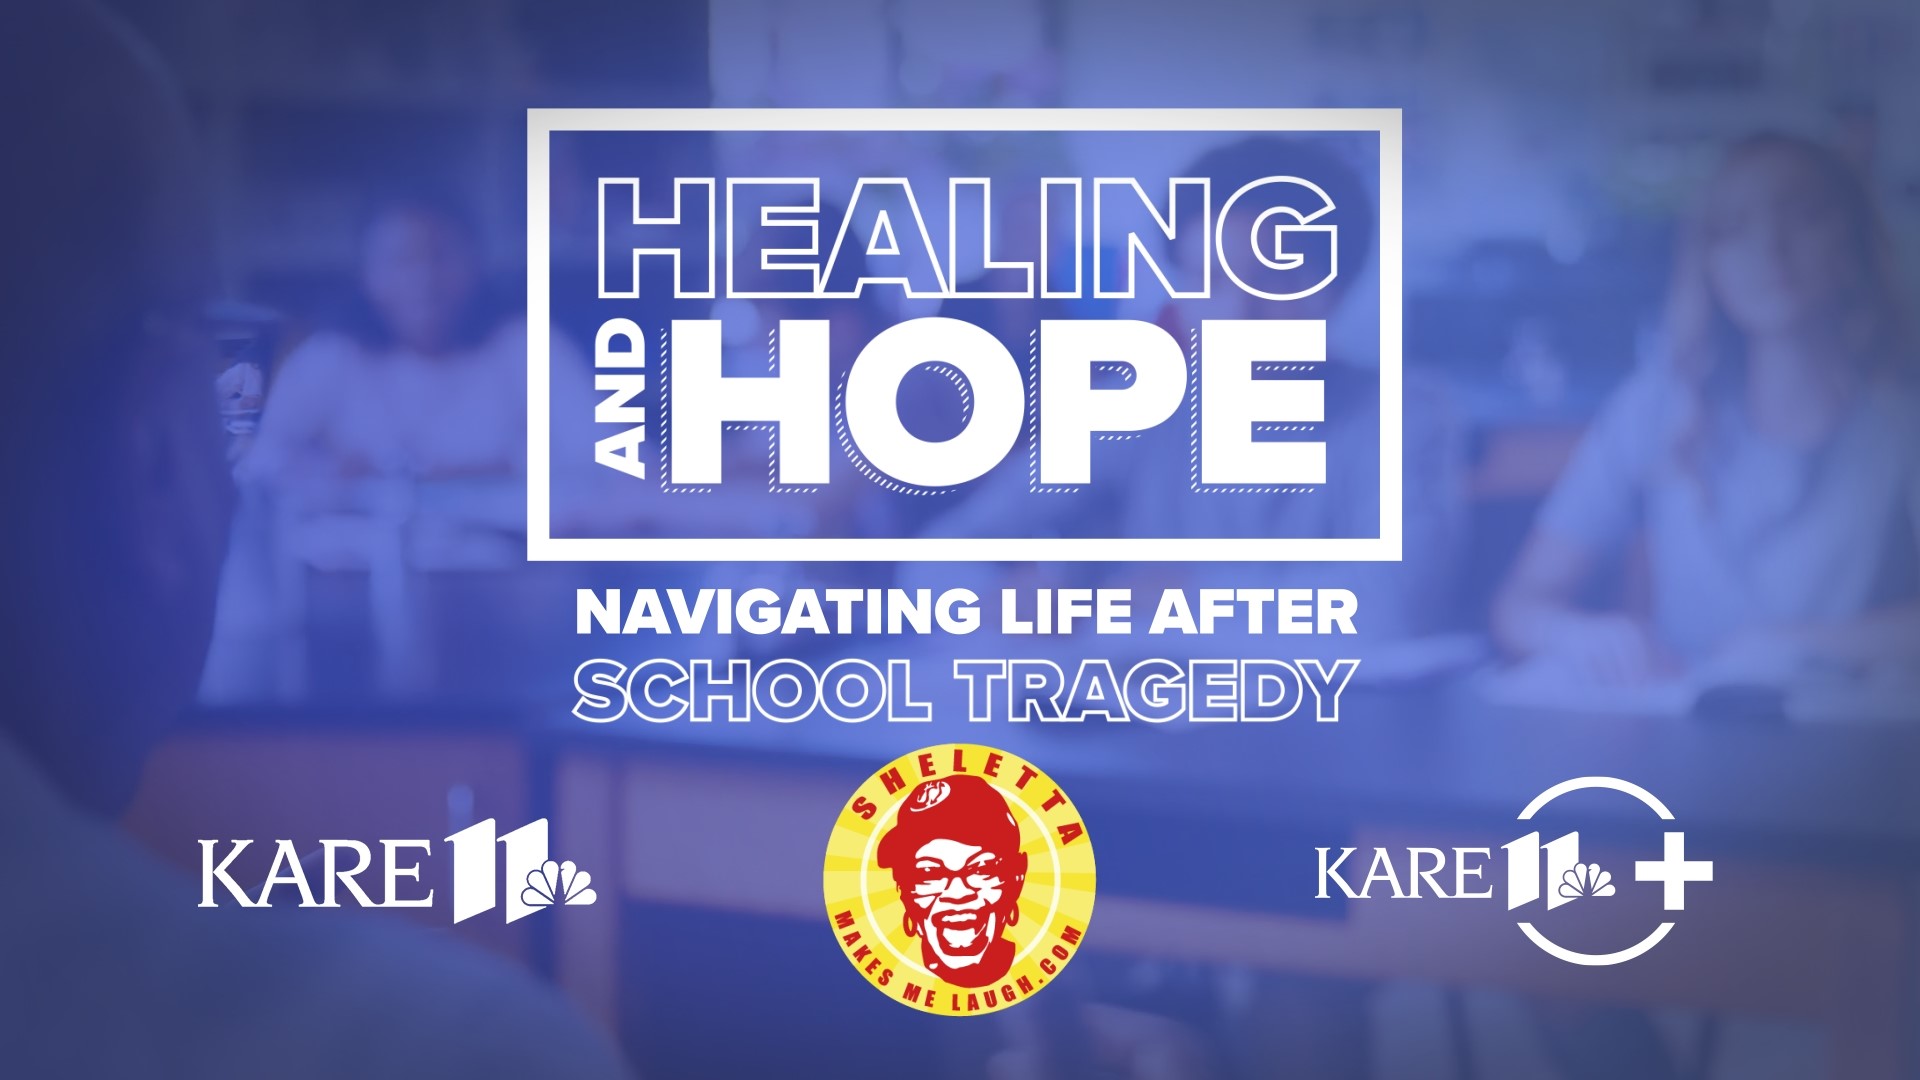 KARE 11 anchor Jason Hackett teams up with Sheletta Brundidge for real talk about teen mental health and school tragedies.